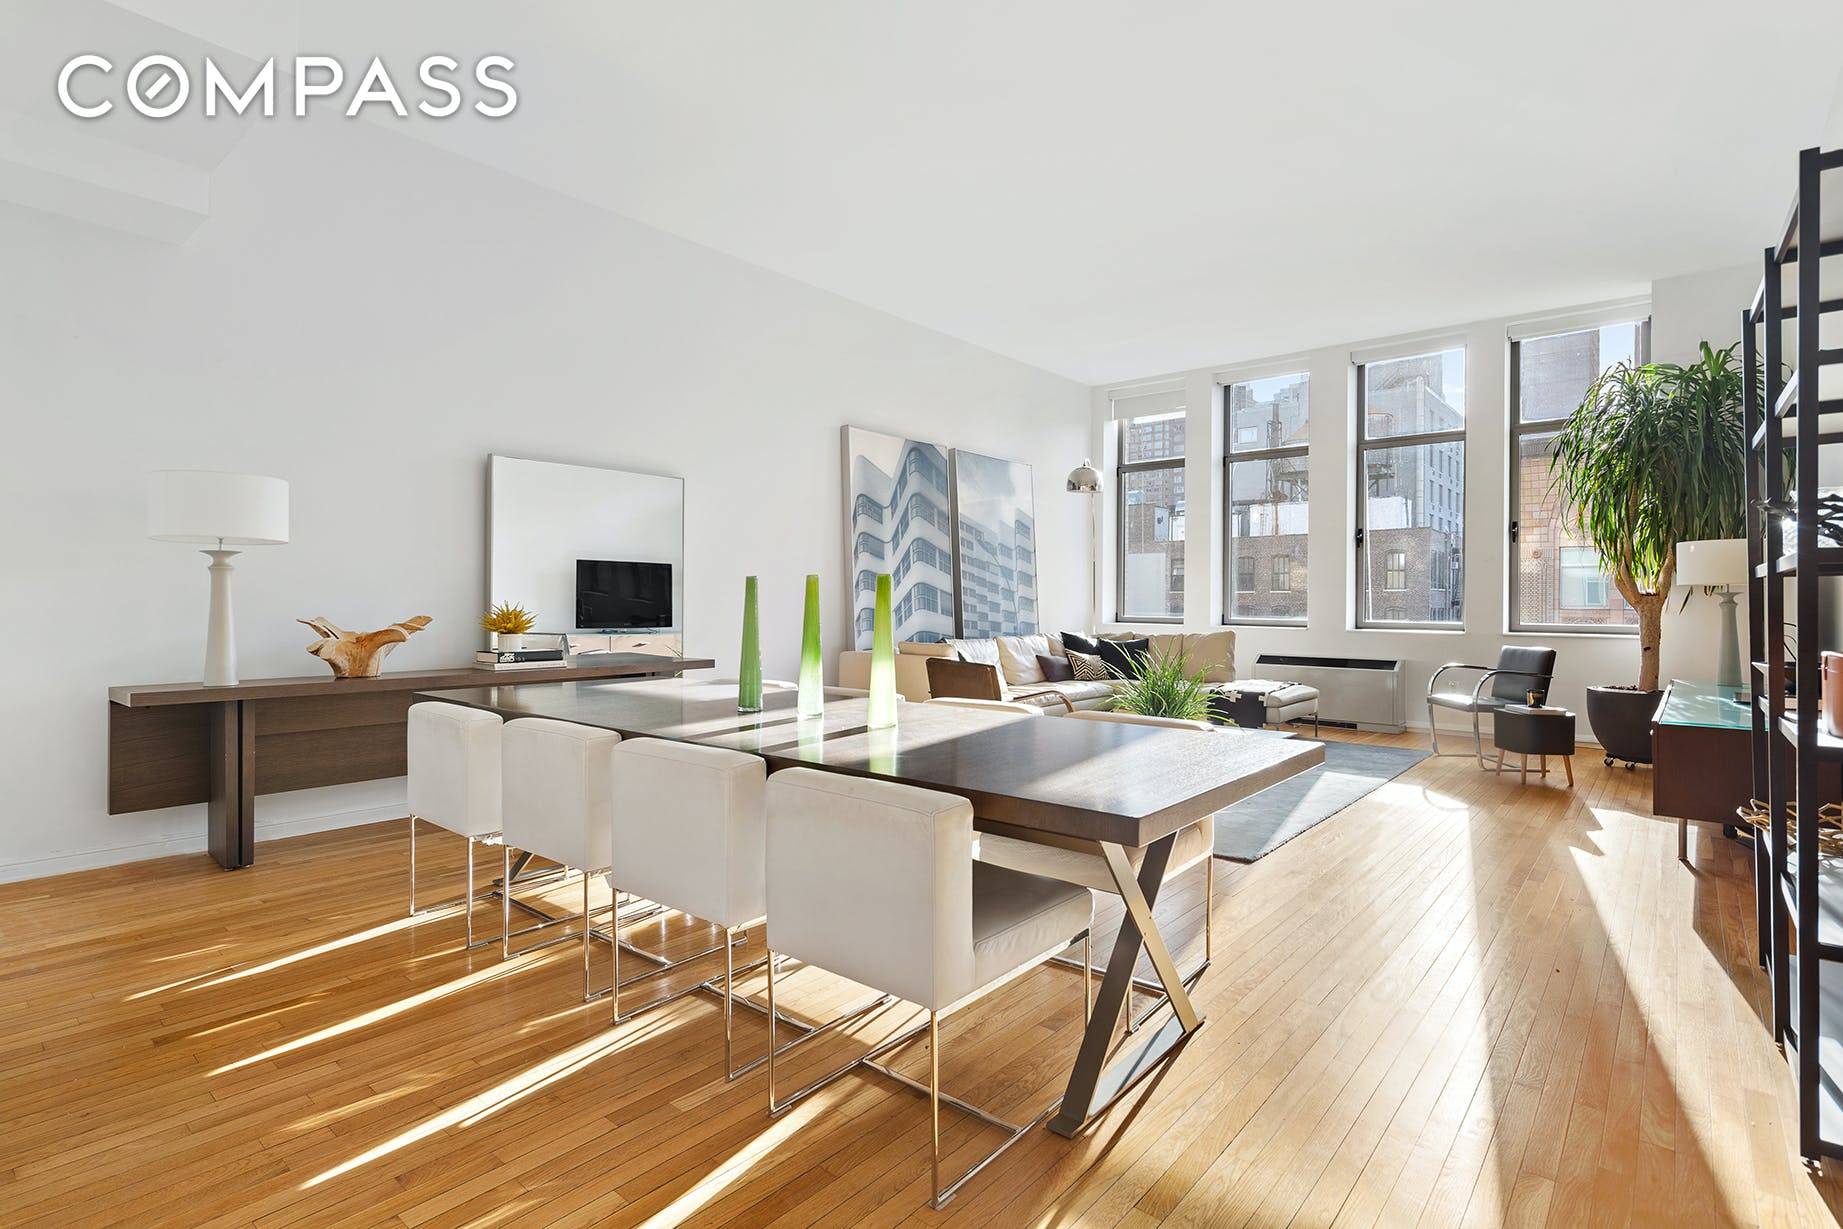 Full service loft living at the Chelsea Mercantile awaits you with this high floor, east facing N line featuring stunning, unobstructed morning light.